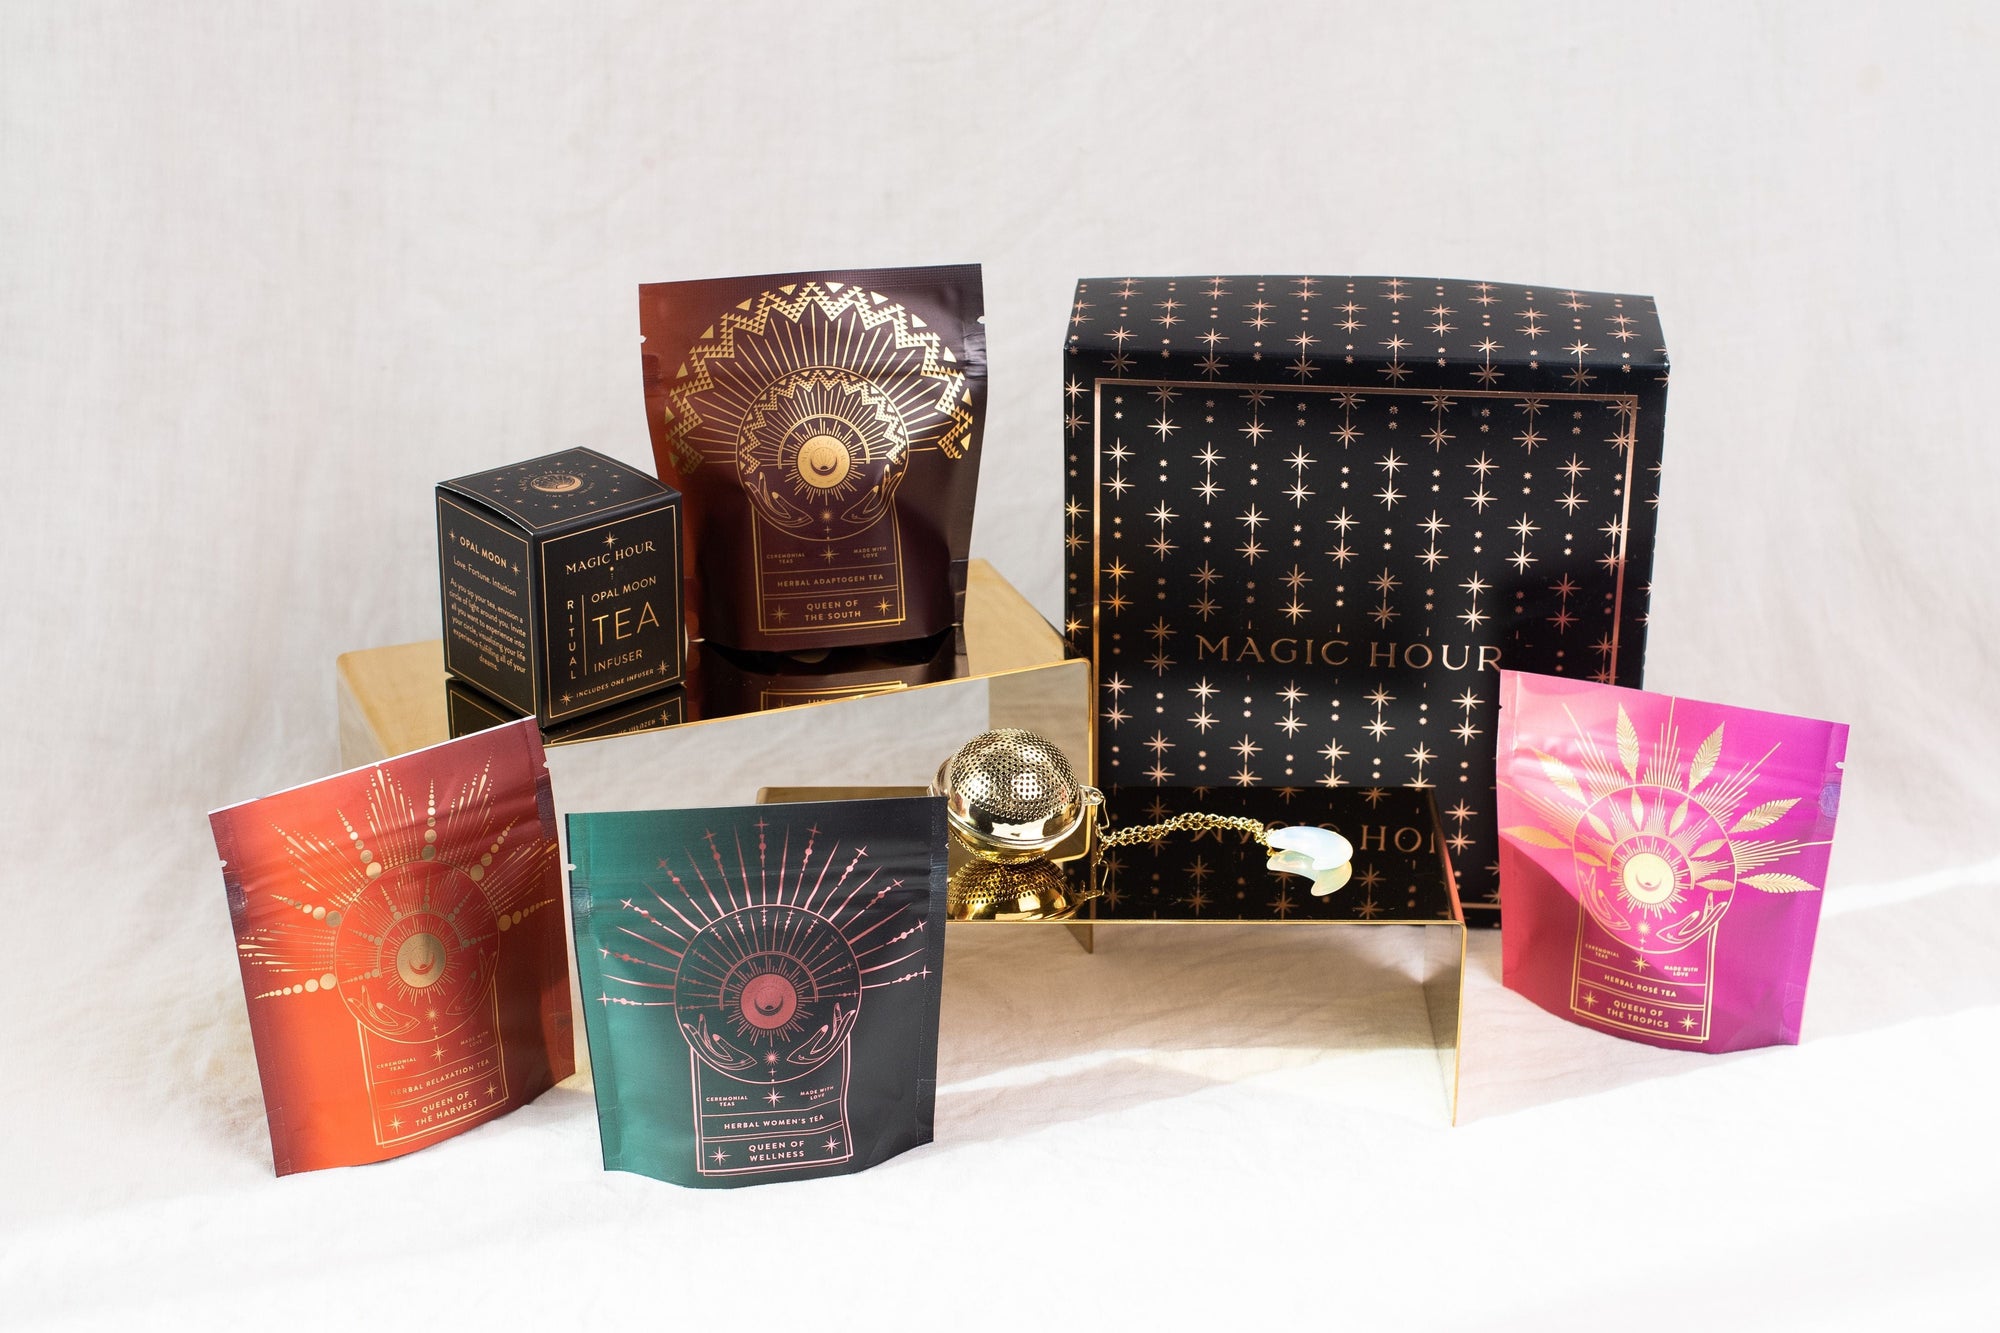 An arrangement of Magic Hour products featuring colorful packages with starry designs and a large black box adorned with gold stars. A small gold tea strainer and a brass tray are also part of the display, highlighting the elegance of their organic loose leaf tea offerings, including The Queen's Sampler Set.